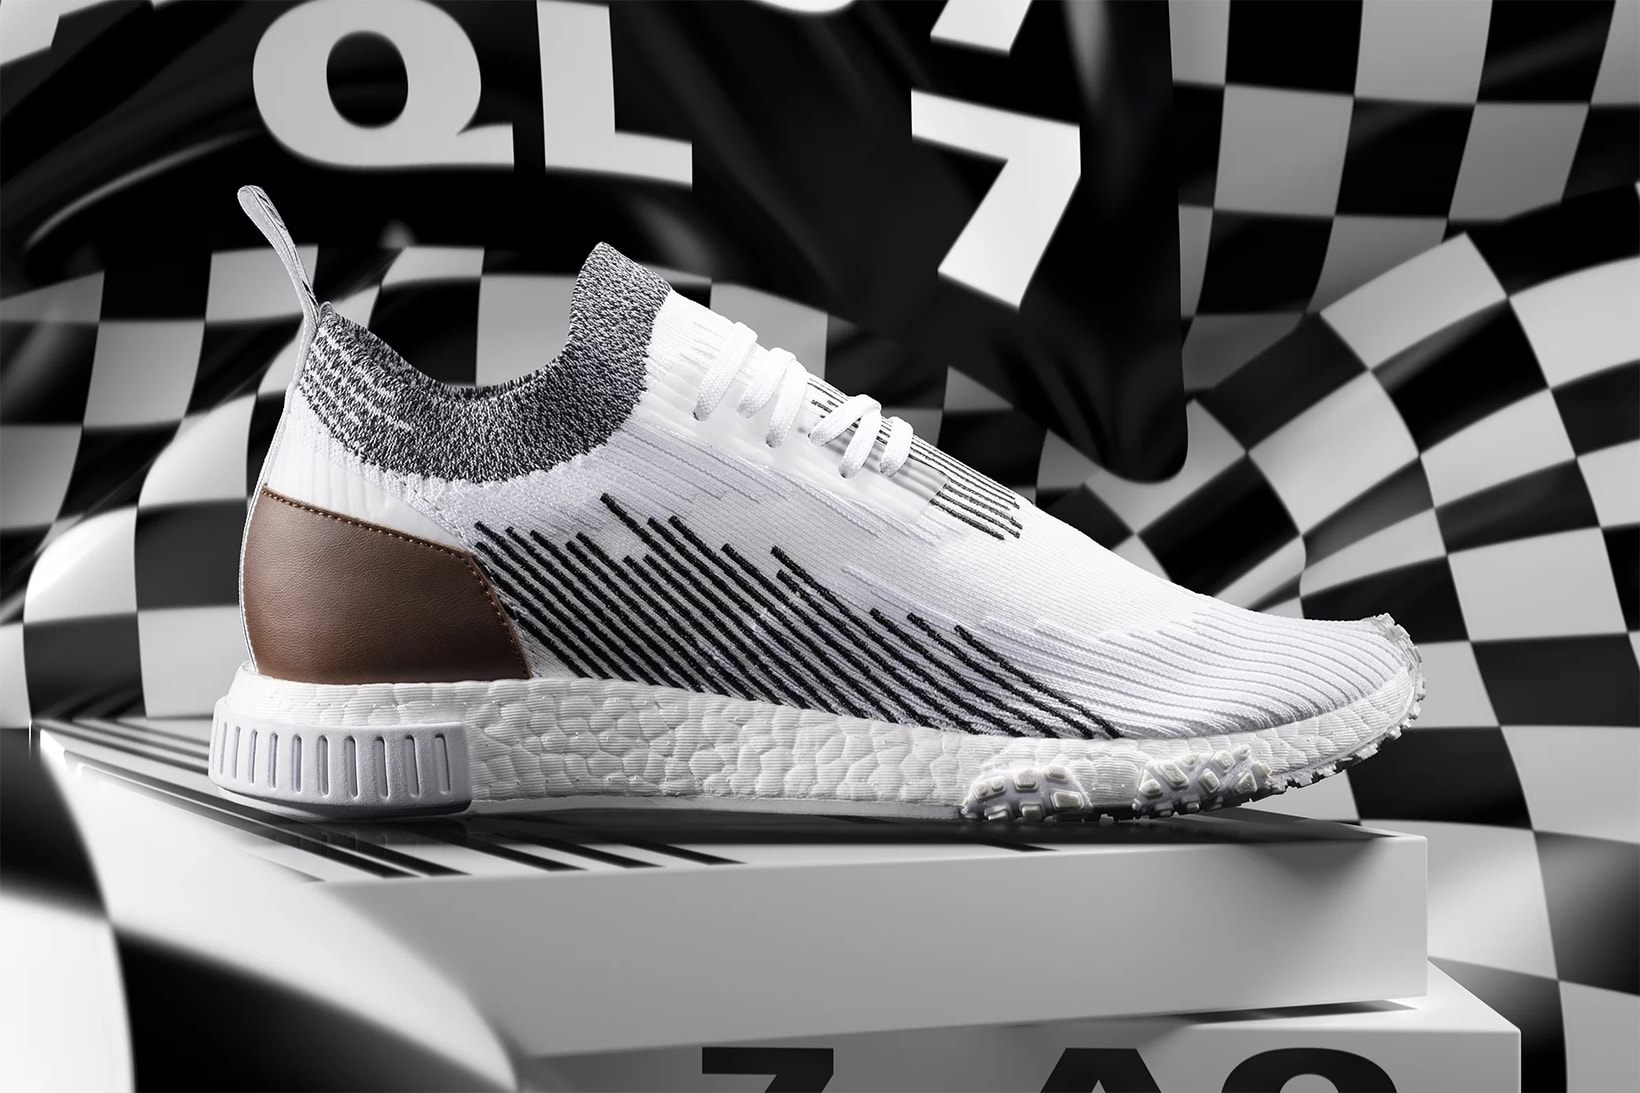 adidas Originals NMD Racer Leather Release Date Whitaker Car Club Heel Tab Black White Stripes Monochrome END. Information Details